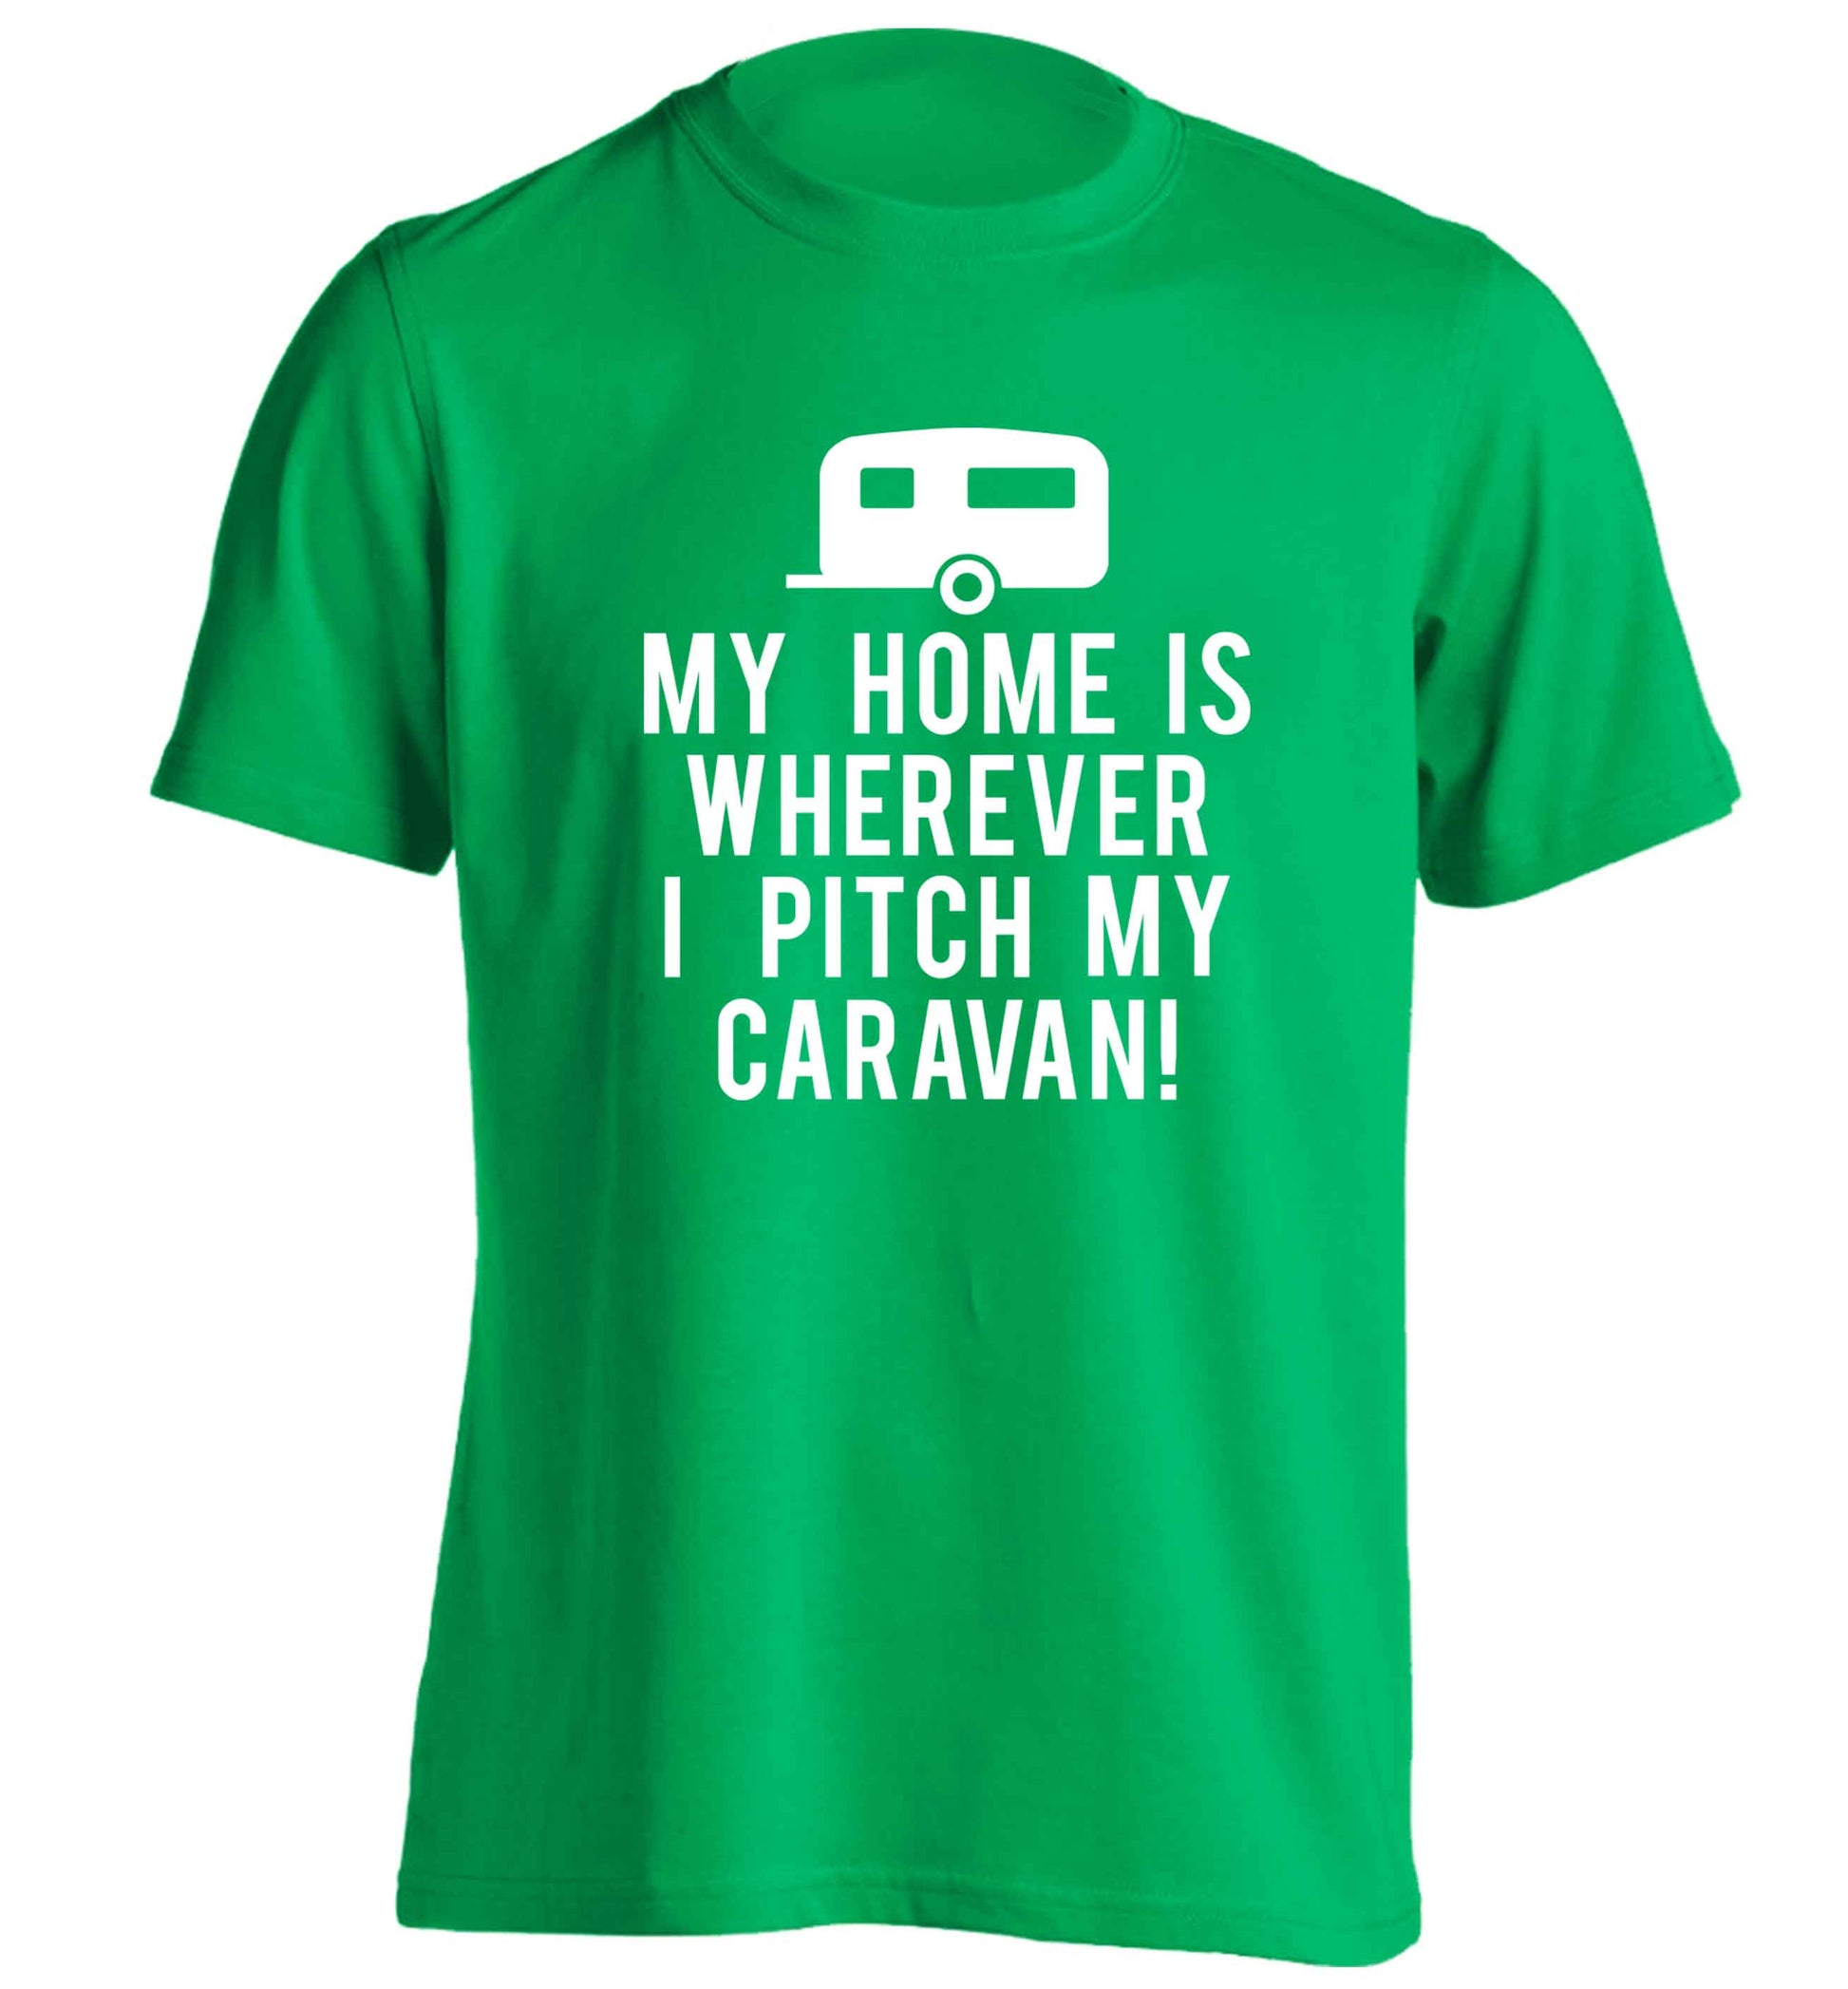 My home is wherever I pitch my caravan adults unisex green Tshirt 2XL